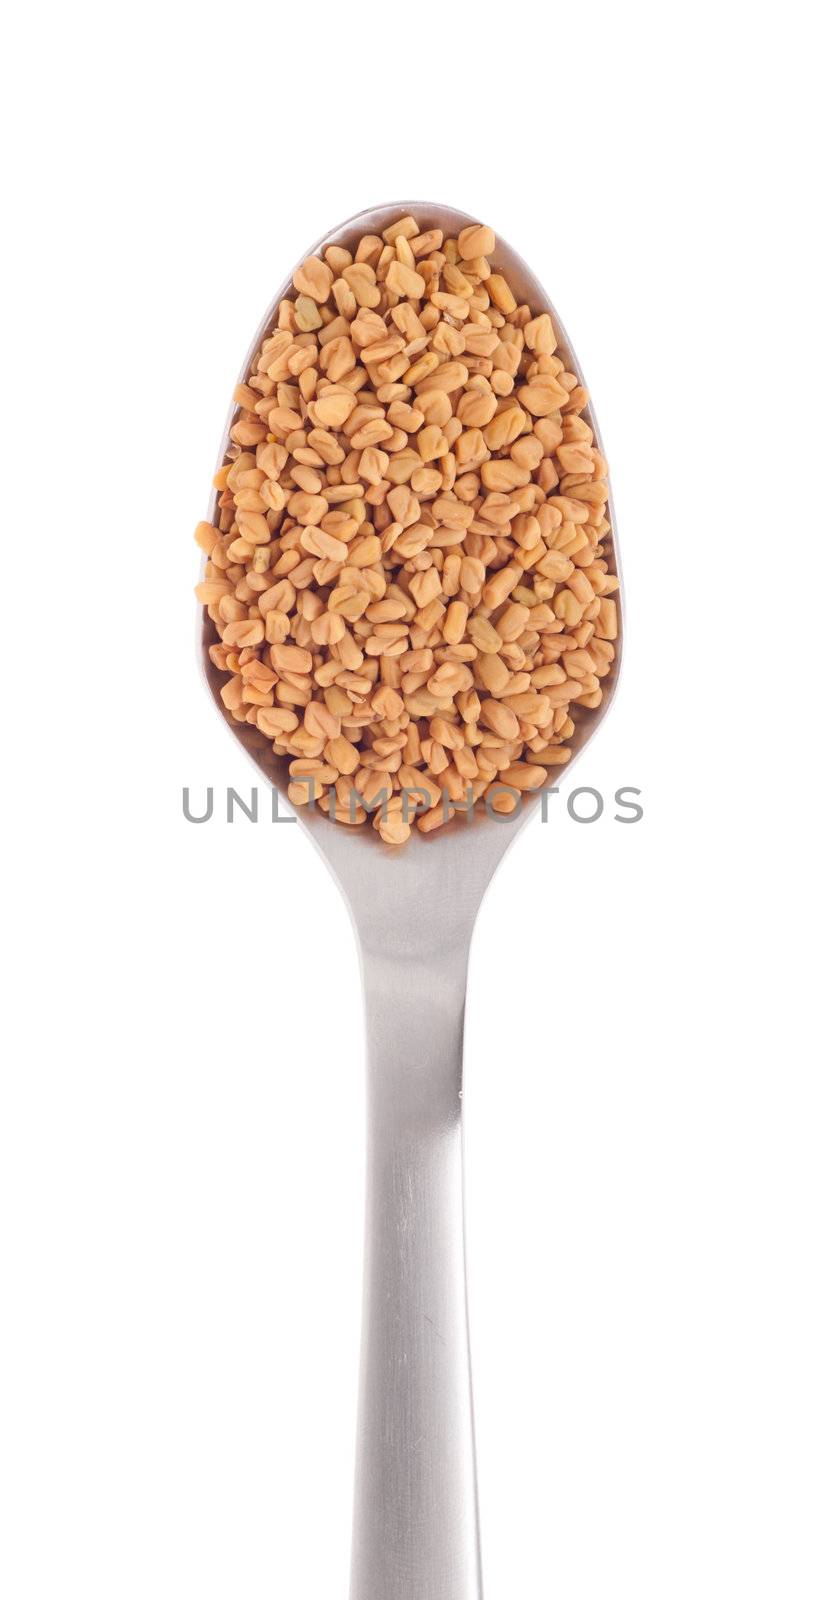 fenugreek seeds spice on a stainless steel spoon, isolated on white background